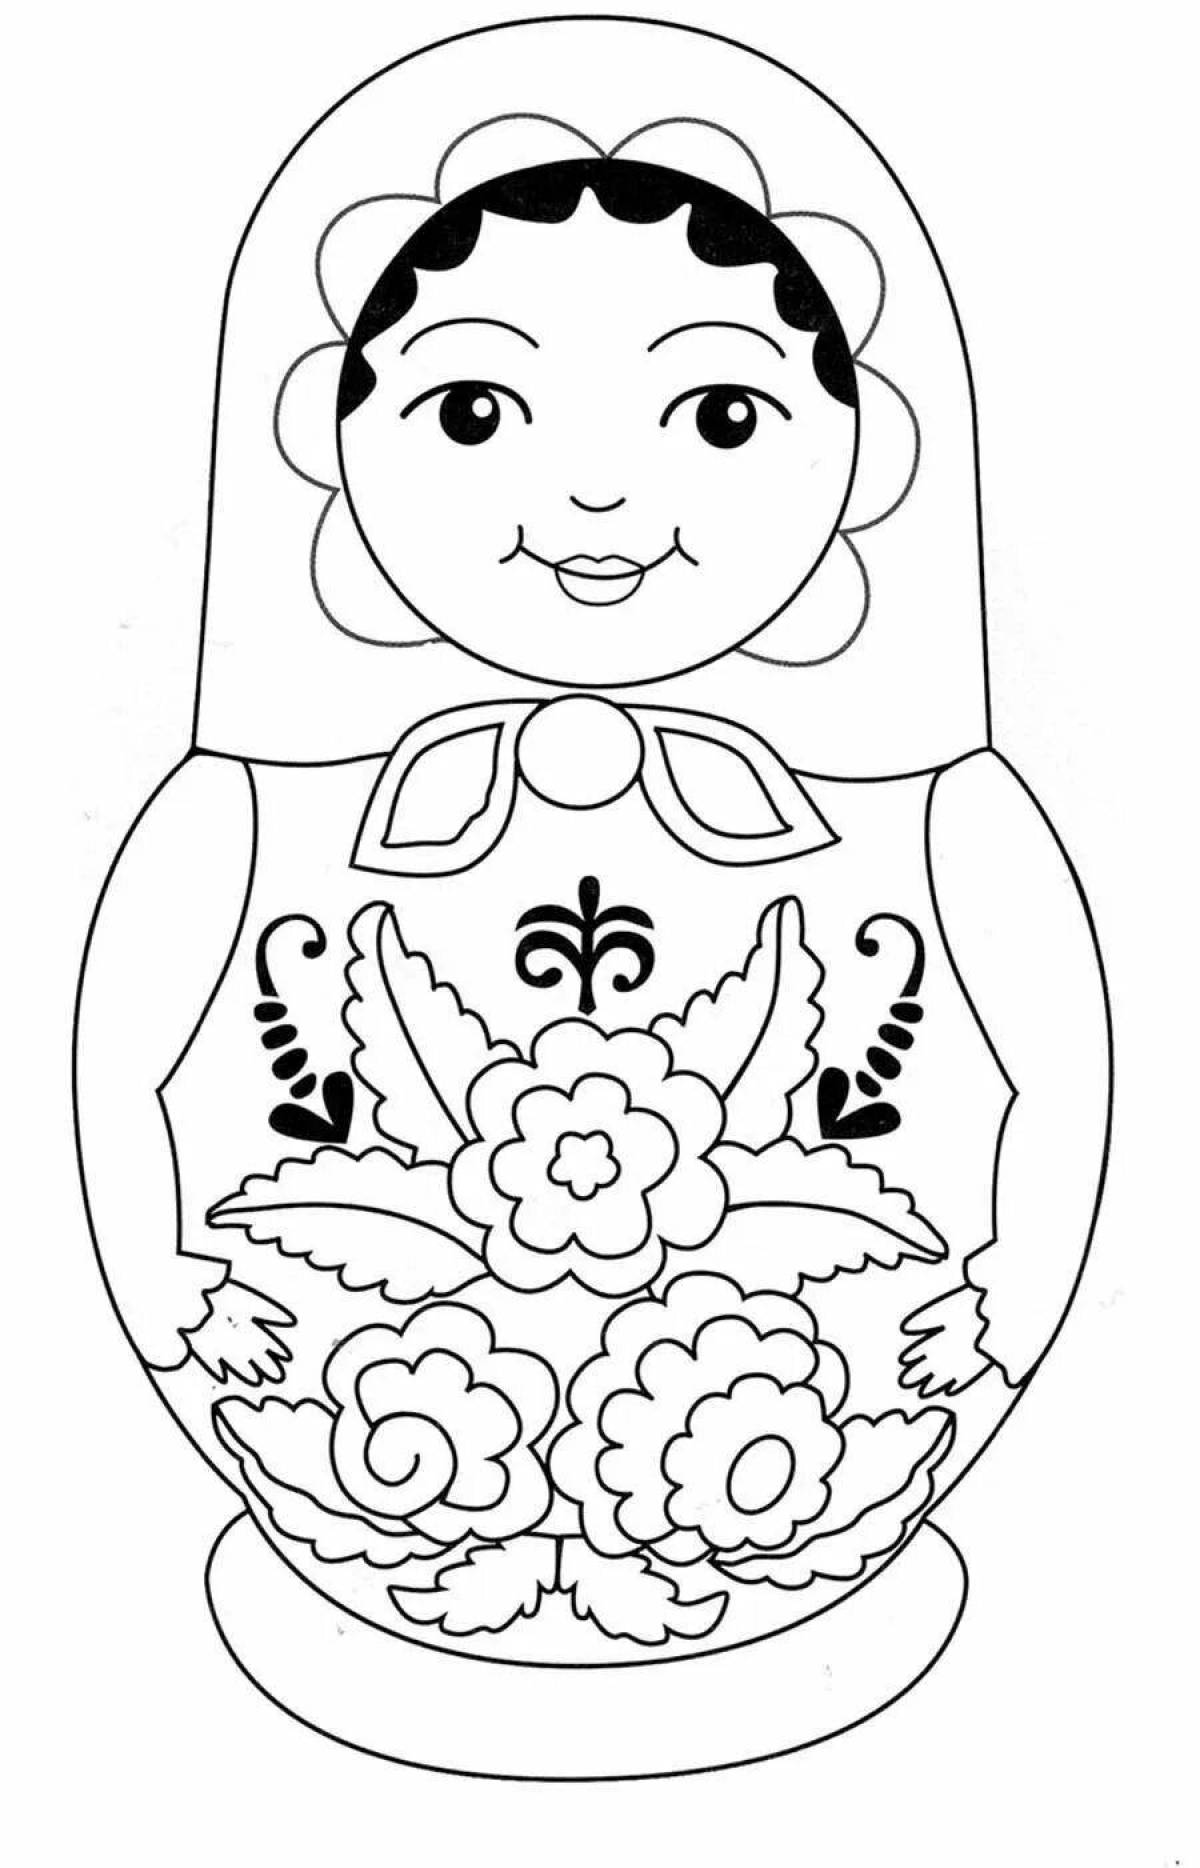 Charming matryoshka coloring book for children 4-5 years old